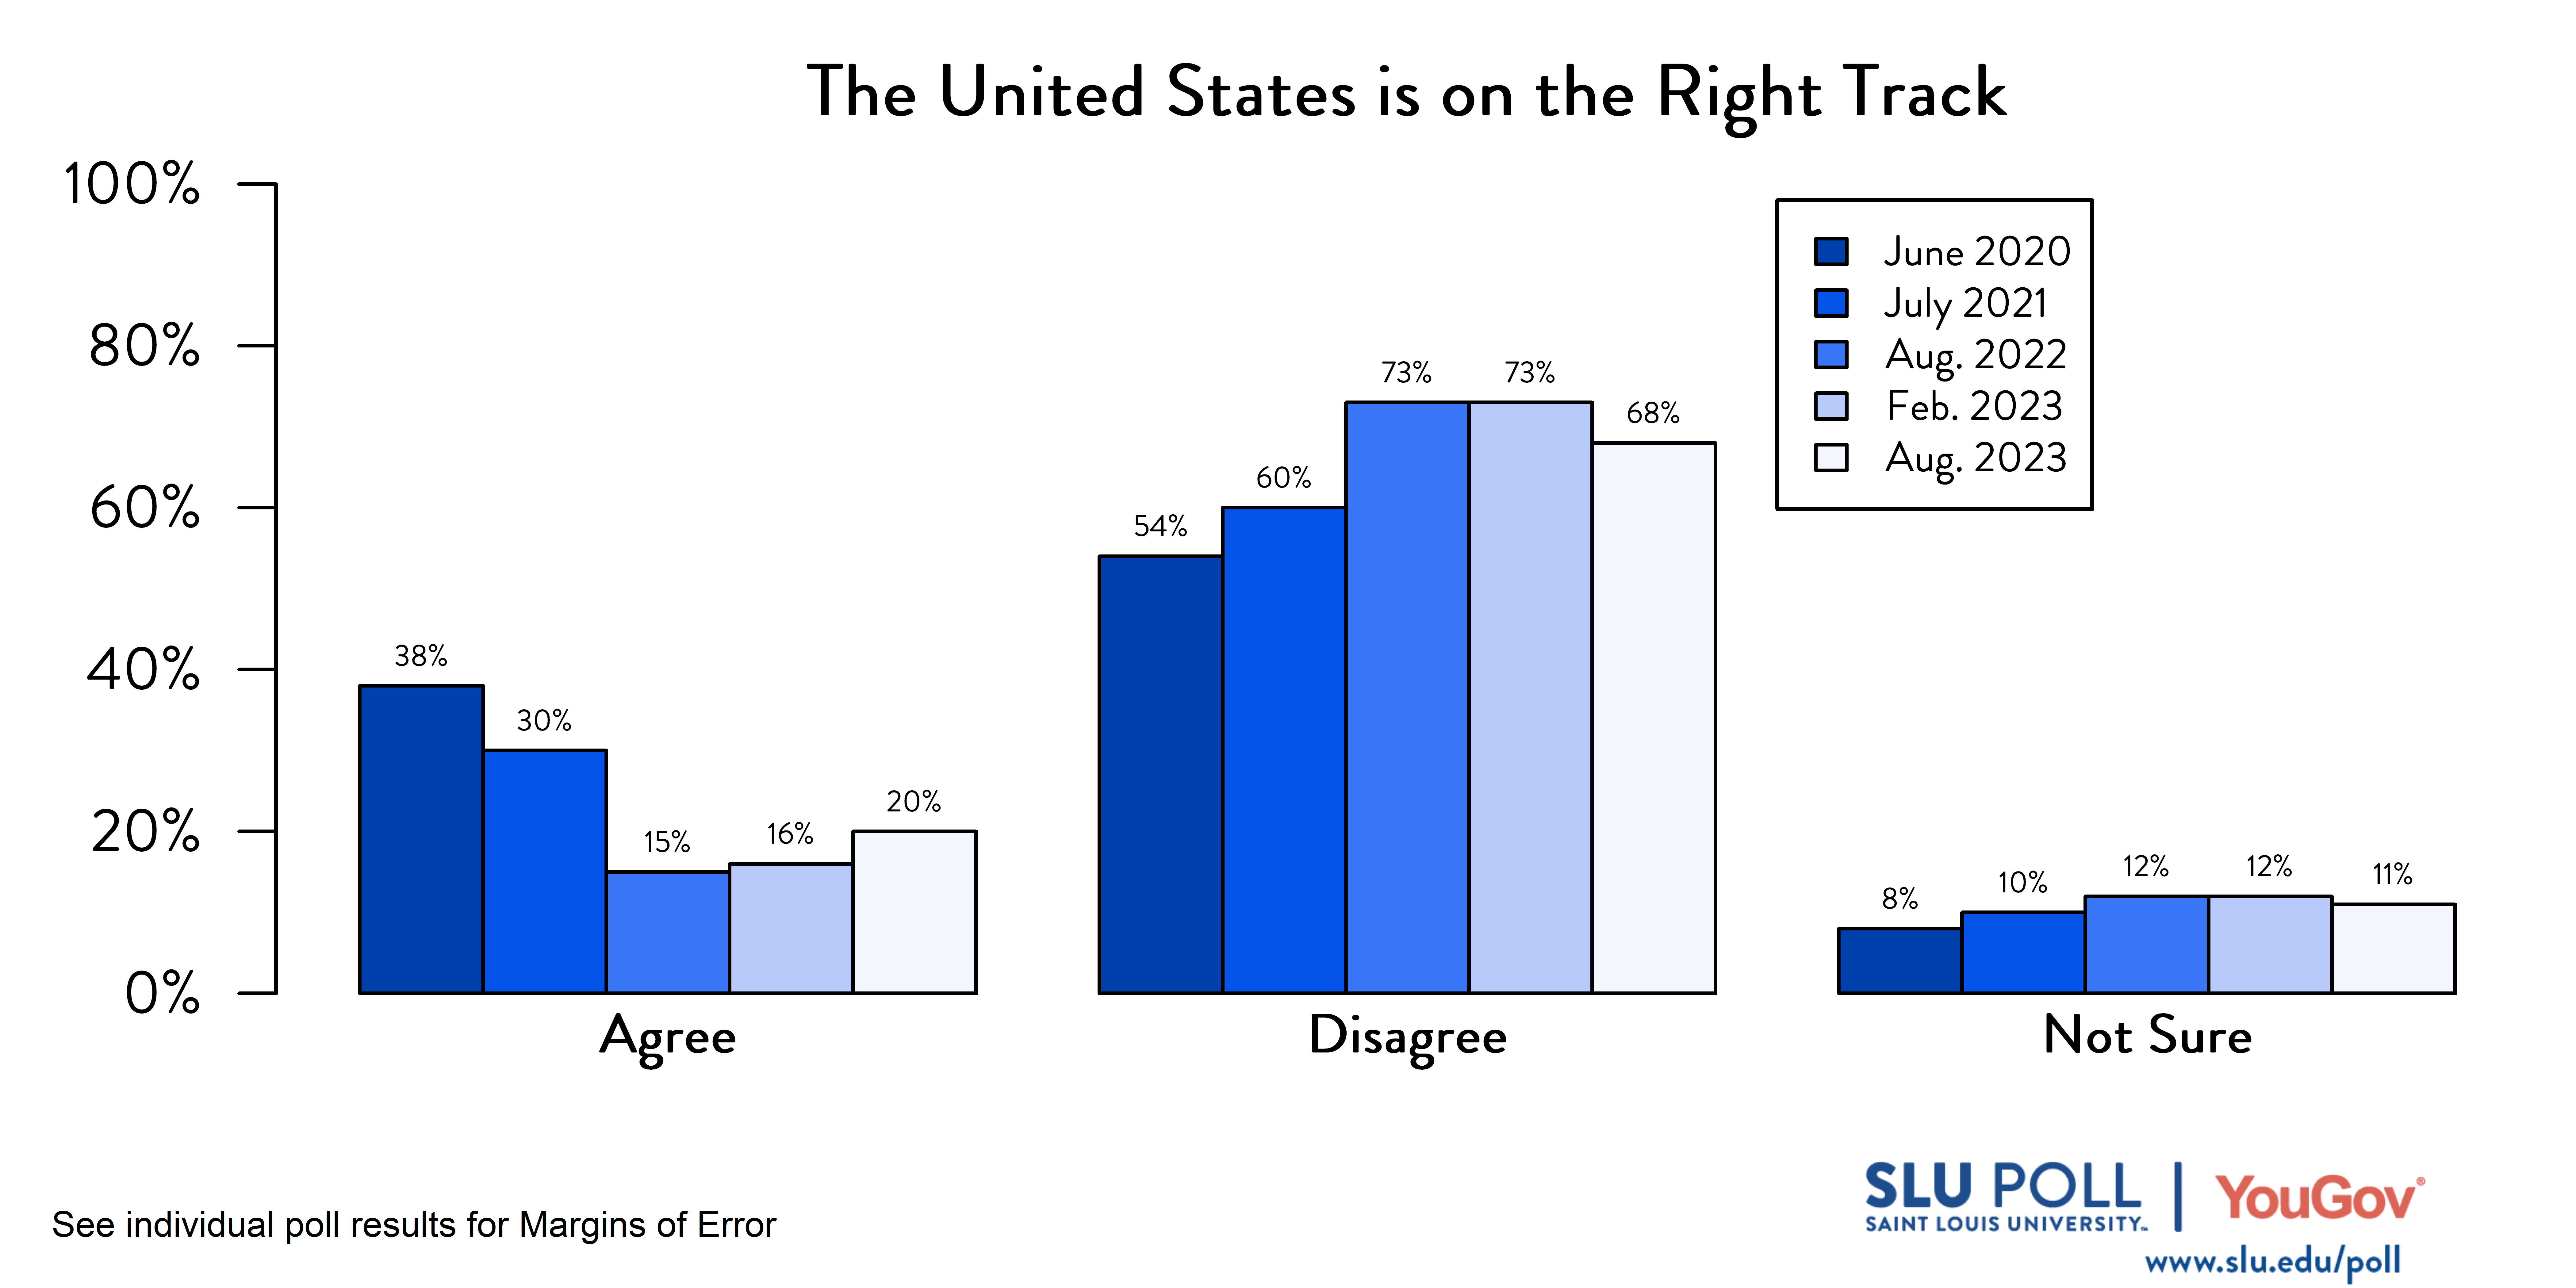 Likely voters' responses to 'Do you agree or disagree with the following statements: The United States is on the right track and headed in a good direction?'. October 2020 Voter Responses: 38% Agree, 54% Disagree, and 8% Not Sure. July 2021 Voter Responses: 30% Agree, 60% Disagree, and 10% Not sure. August 2022 Voter Responses: 15% Agree, 73% Disagree, and 12% Not Sure. February 2023 Voter Responses: 16% Agree, 73% Disagree, and 12% Not sure. August 2023 Voter Responses: 20% Agree, 68% Disagree, and 11% Not Sure.